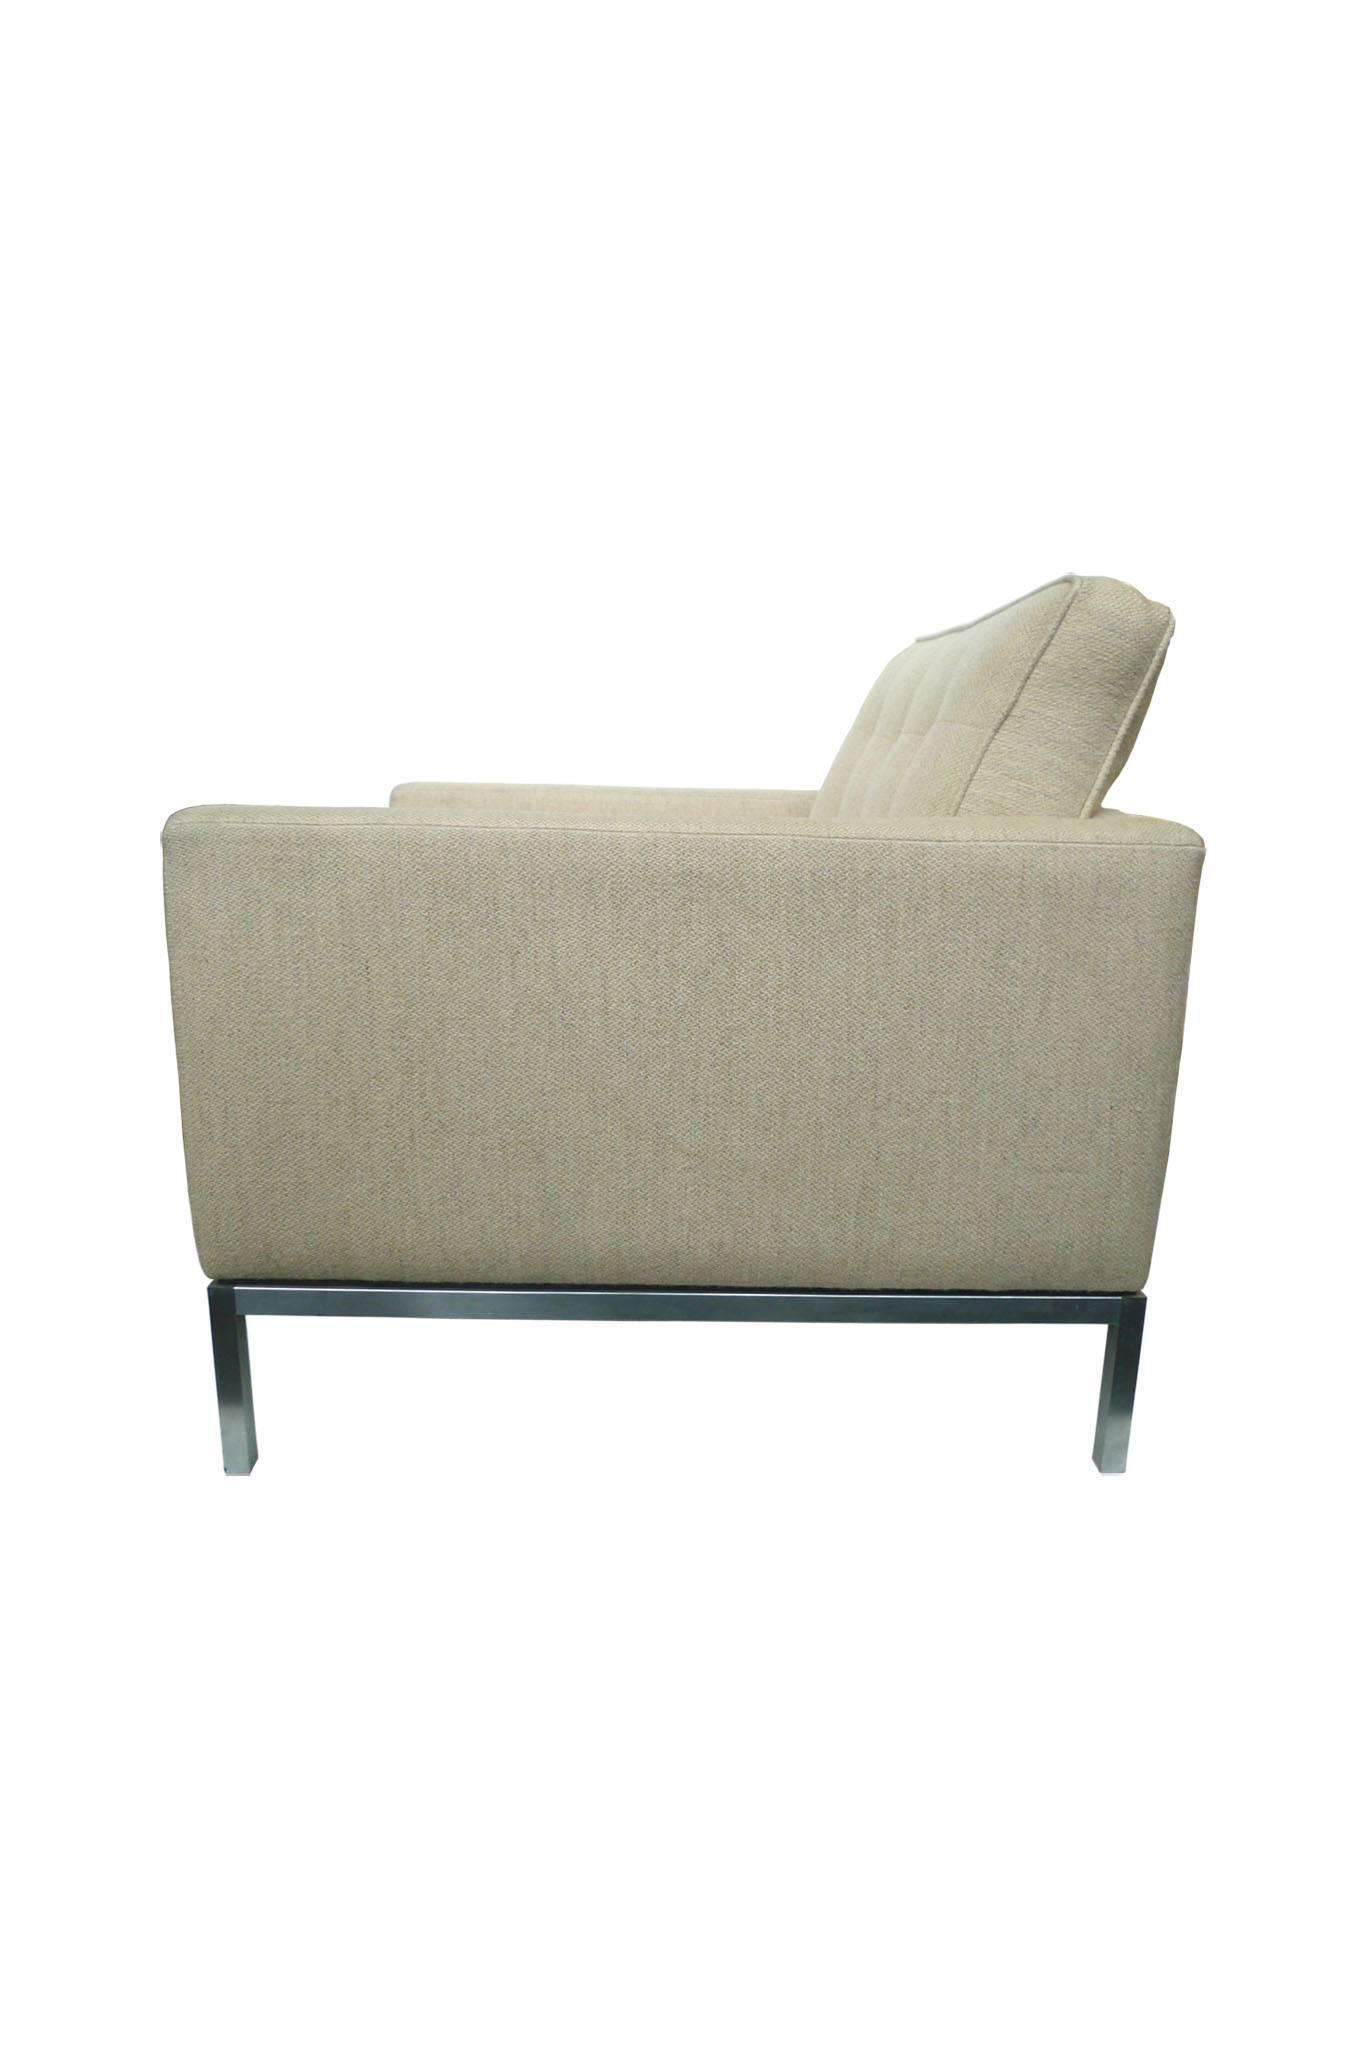 This Florence Knoll club chair maintains its original beige-cream upholstery. It is a fine example of Knoll's modernist designs: smooth, simple lines and planes in service of comfort. The chair's elegant features include tufted cushions framed by